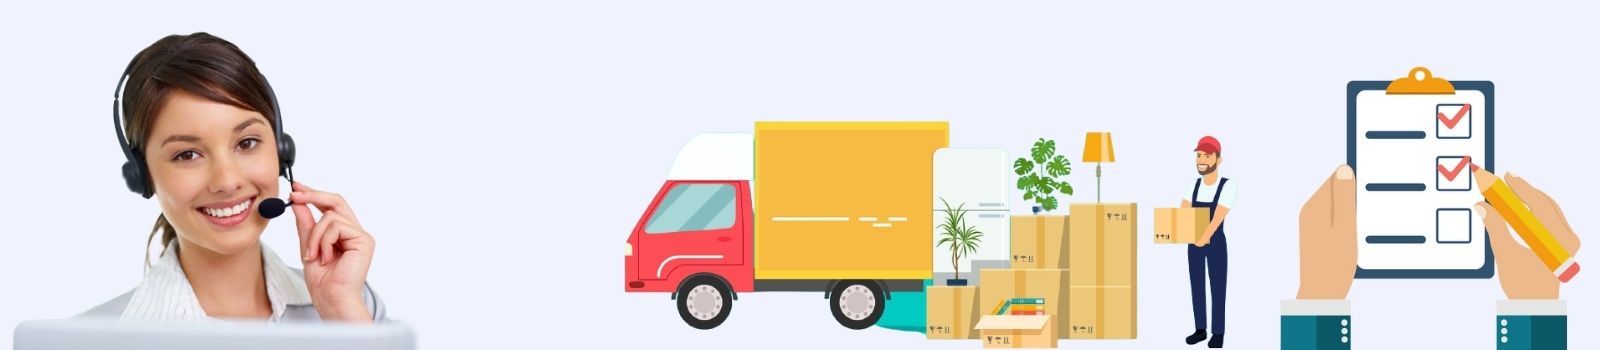 packers and movers services in Bangalore